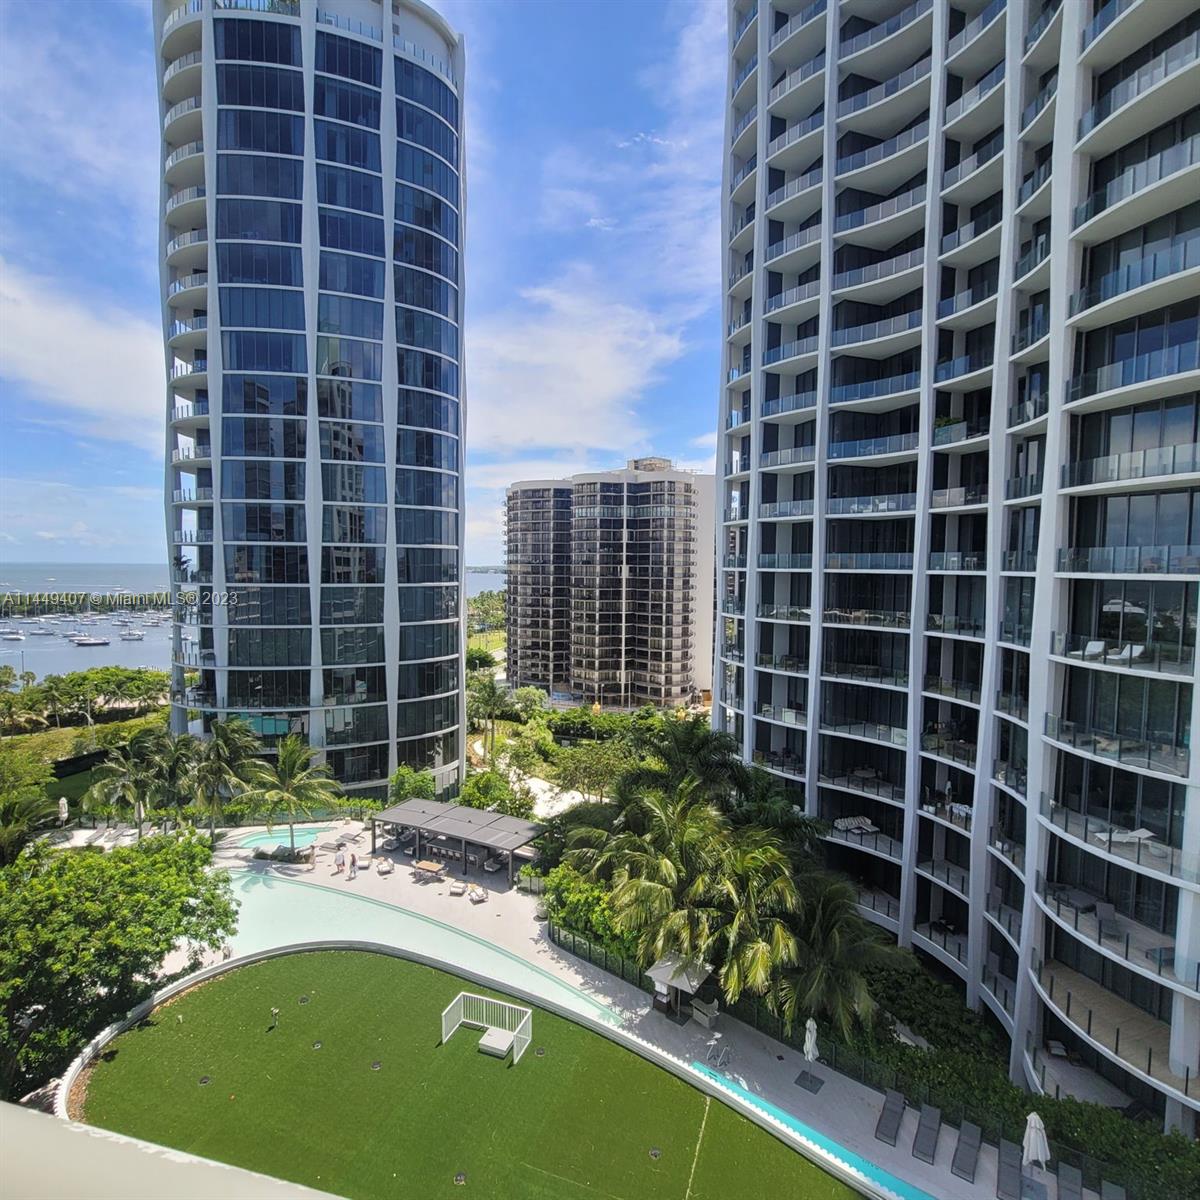 Photo 2 of The Tower Residences Cond Apt 1004 in Miami - MLS A11449407